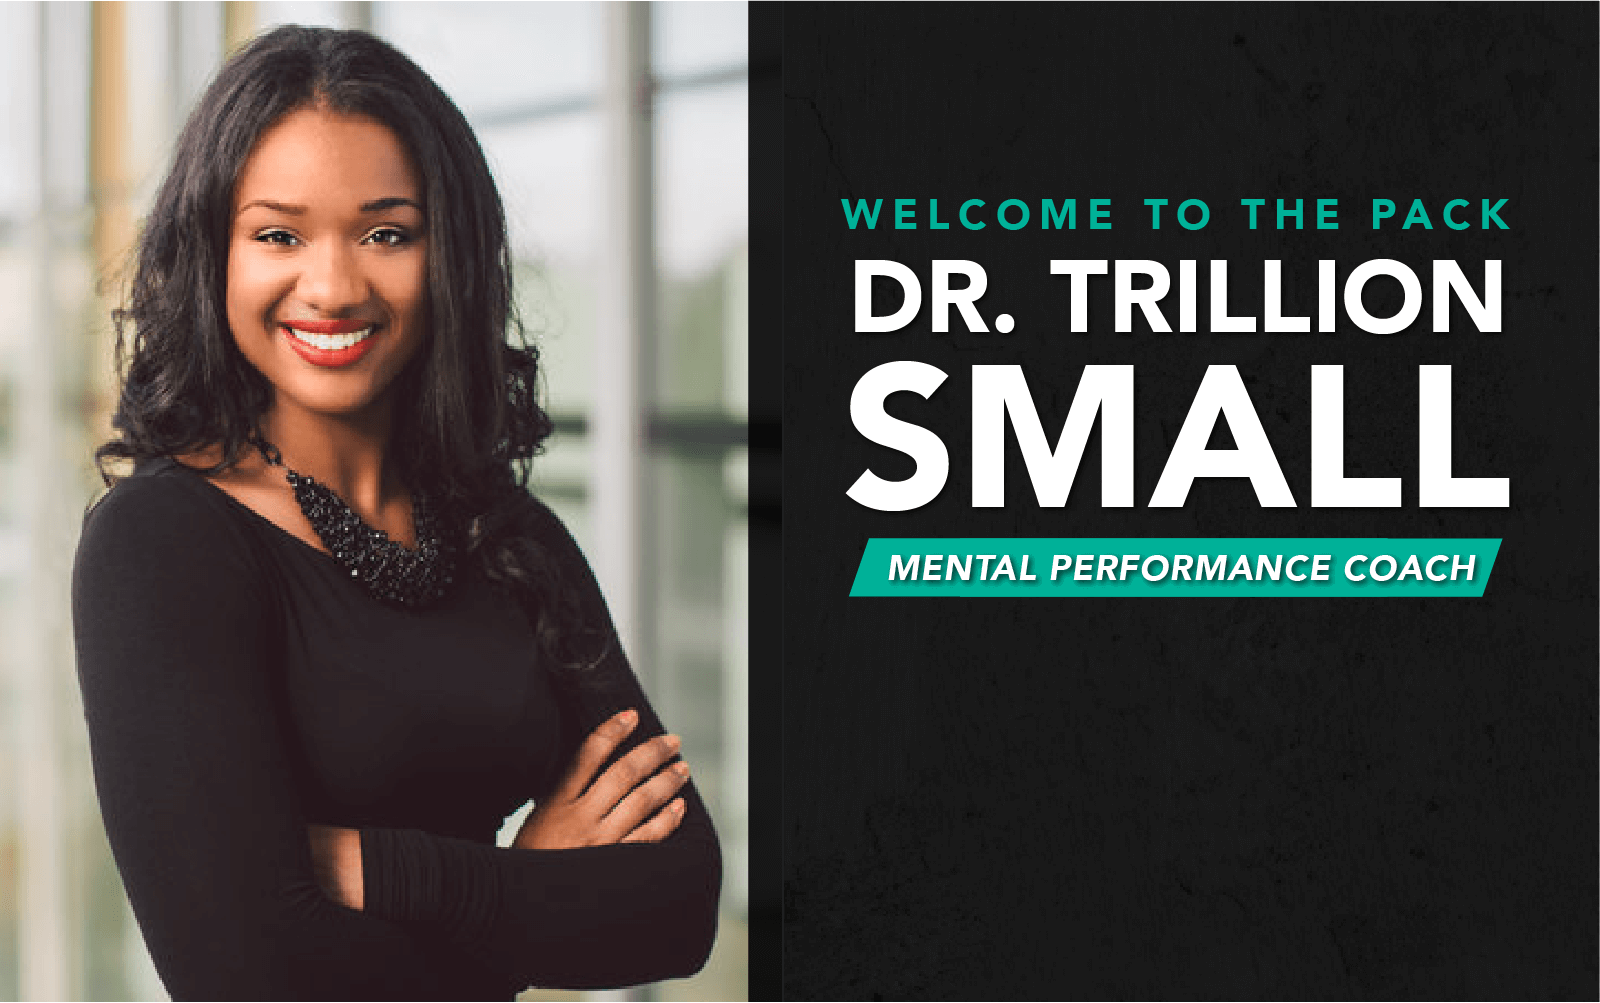 Dr. Trillion Small Joins Coaching Staff as Mental Performance Coach